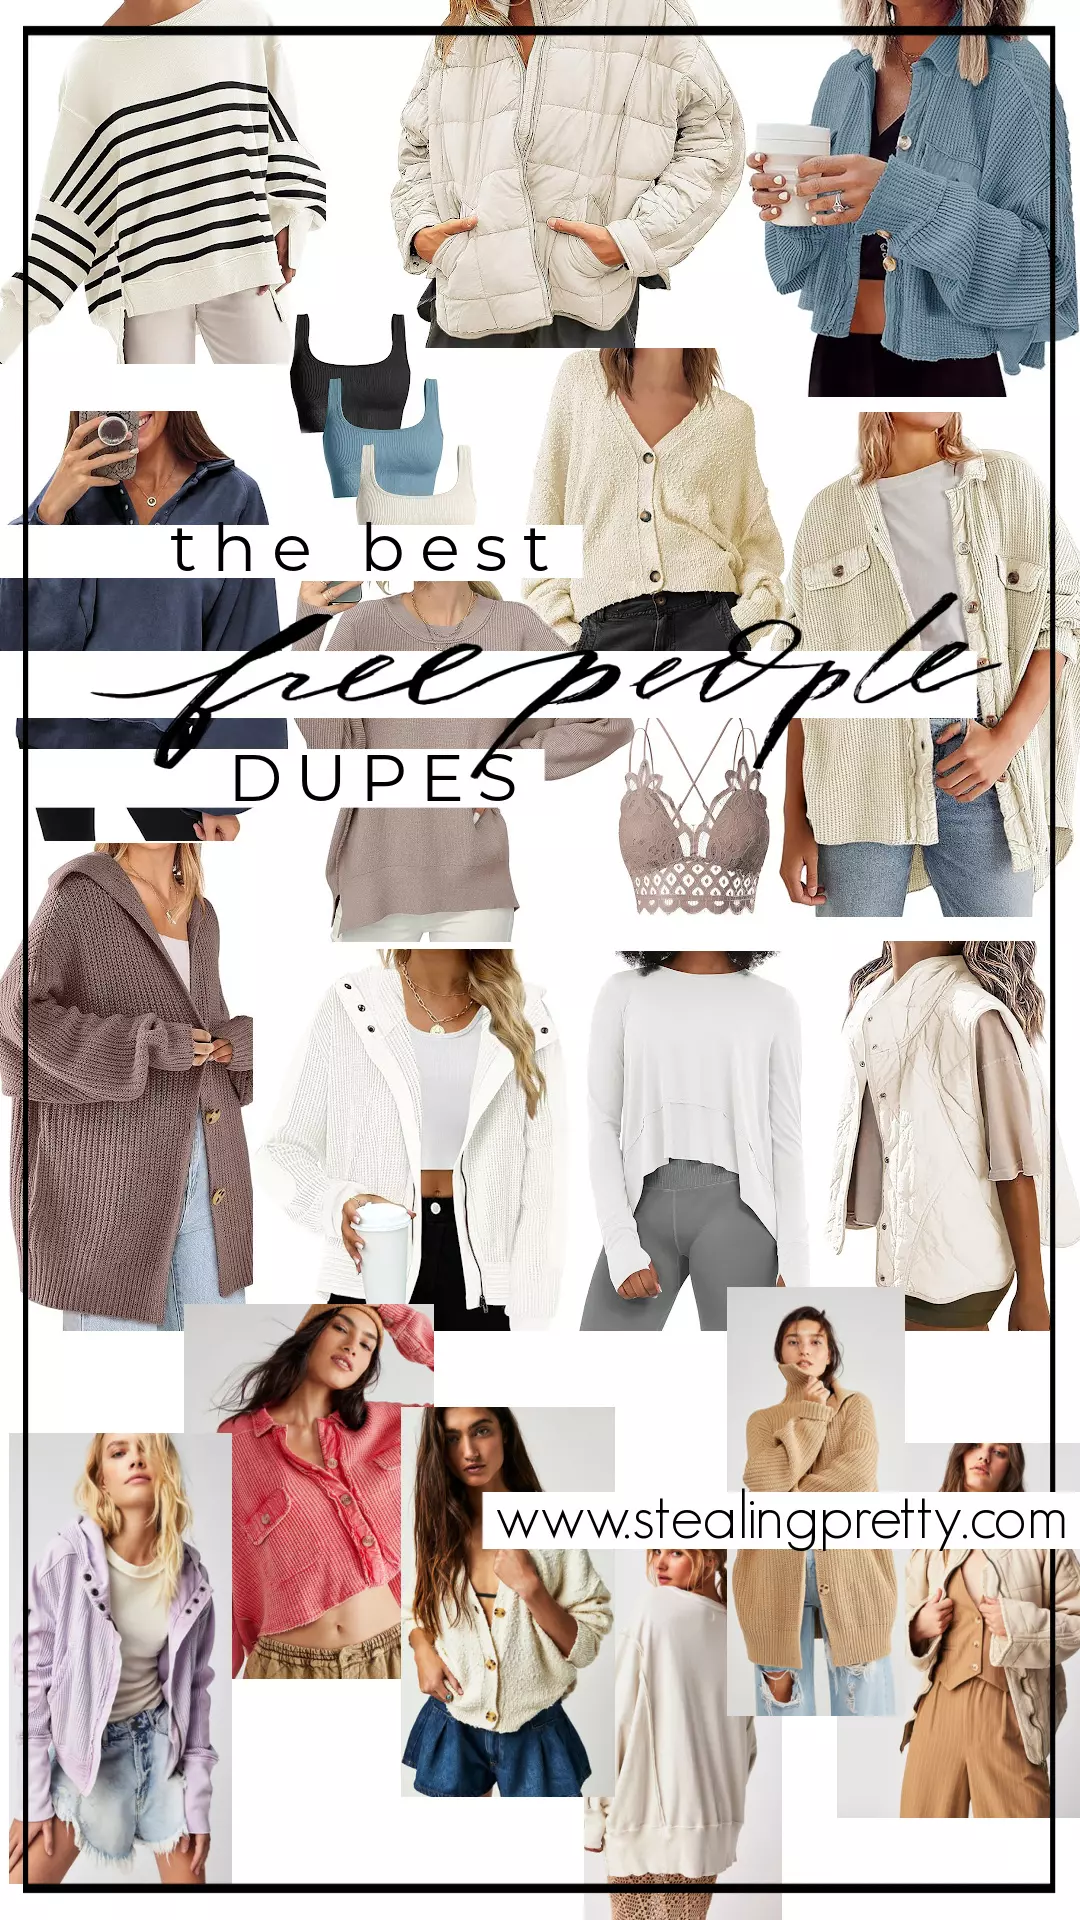 Clothes collage of Free People dupes clothes.